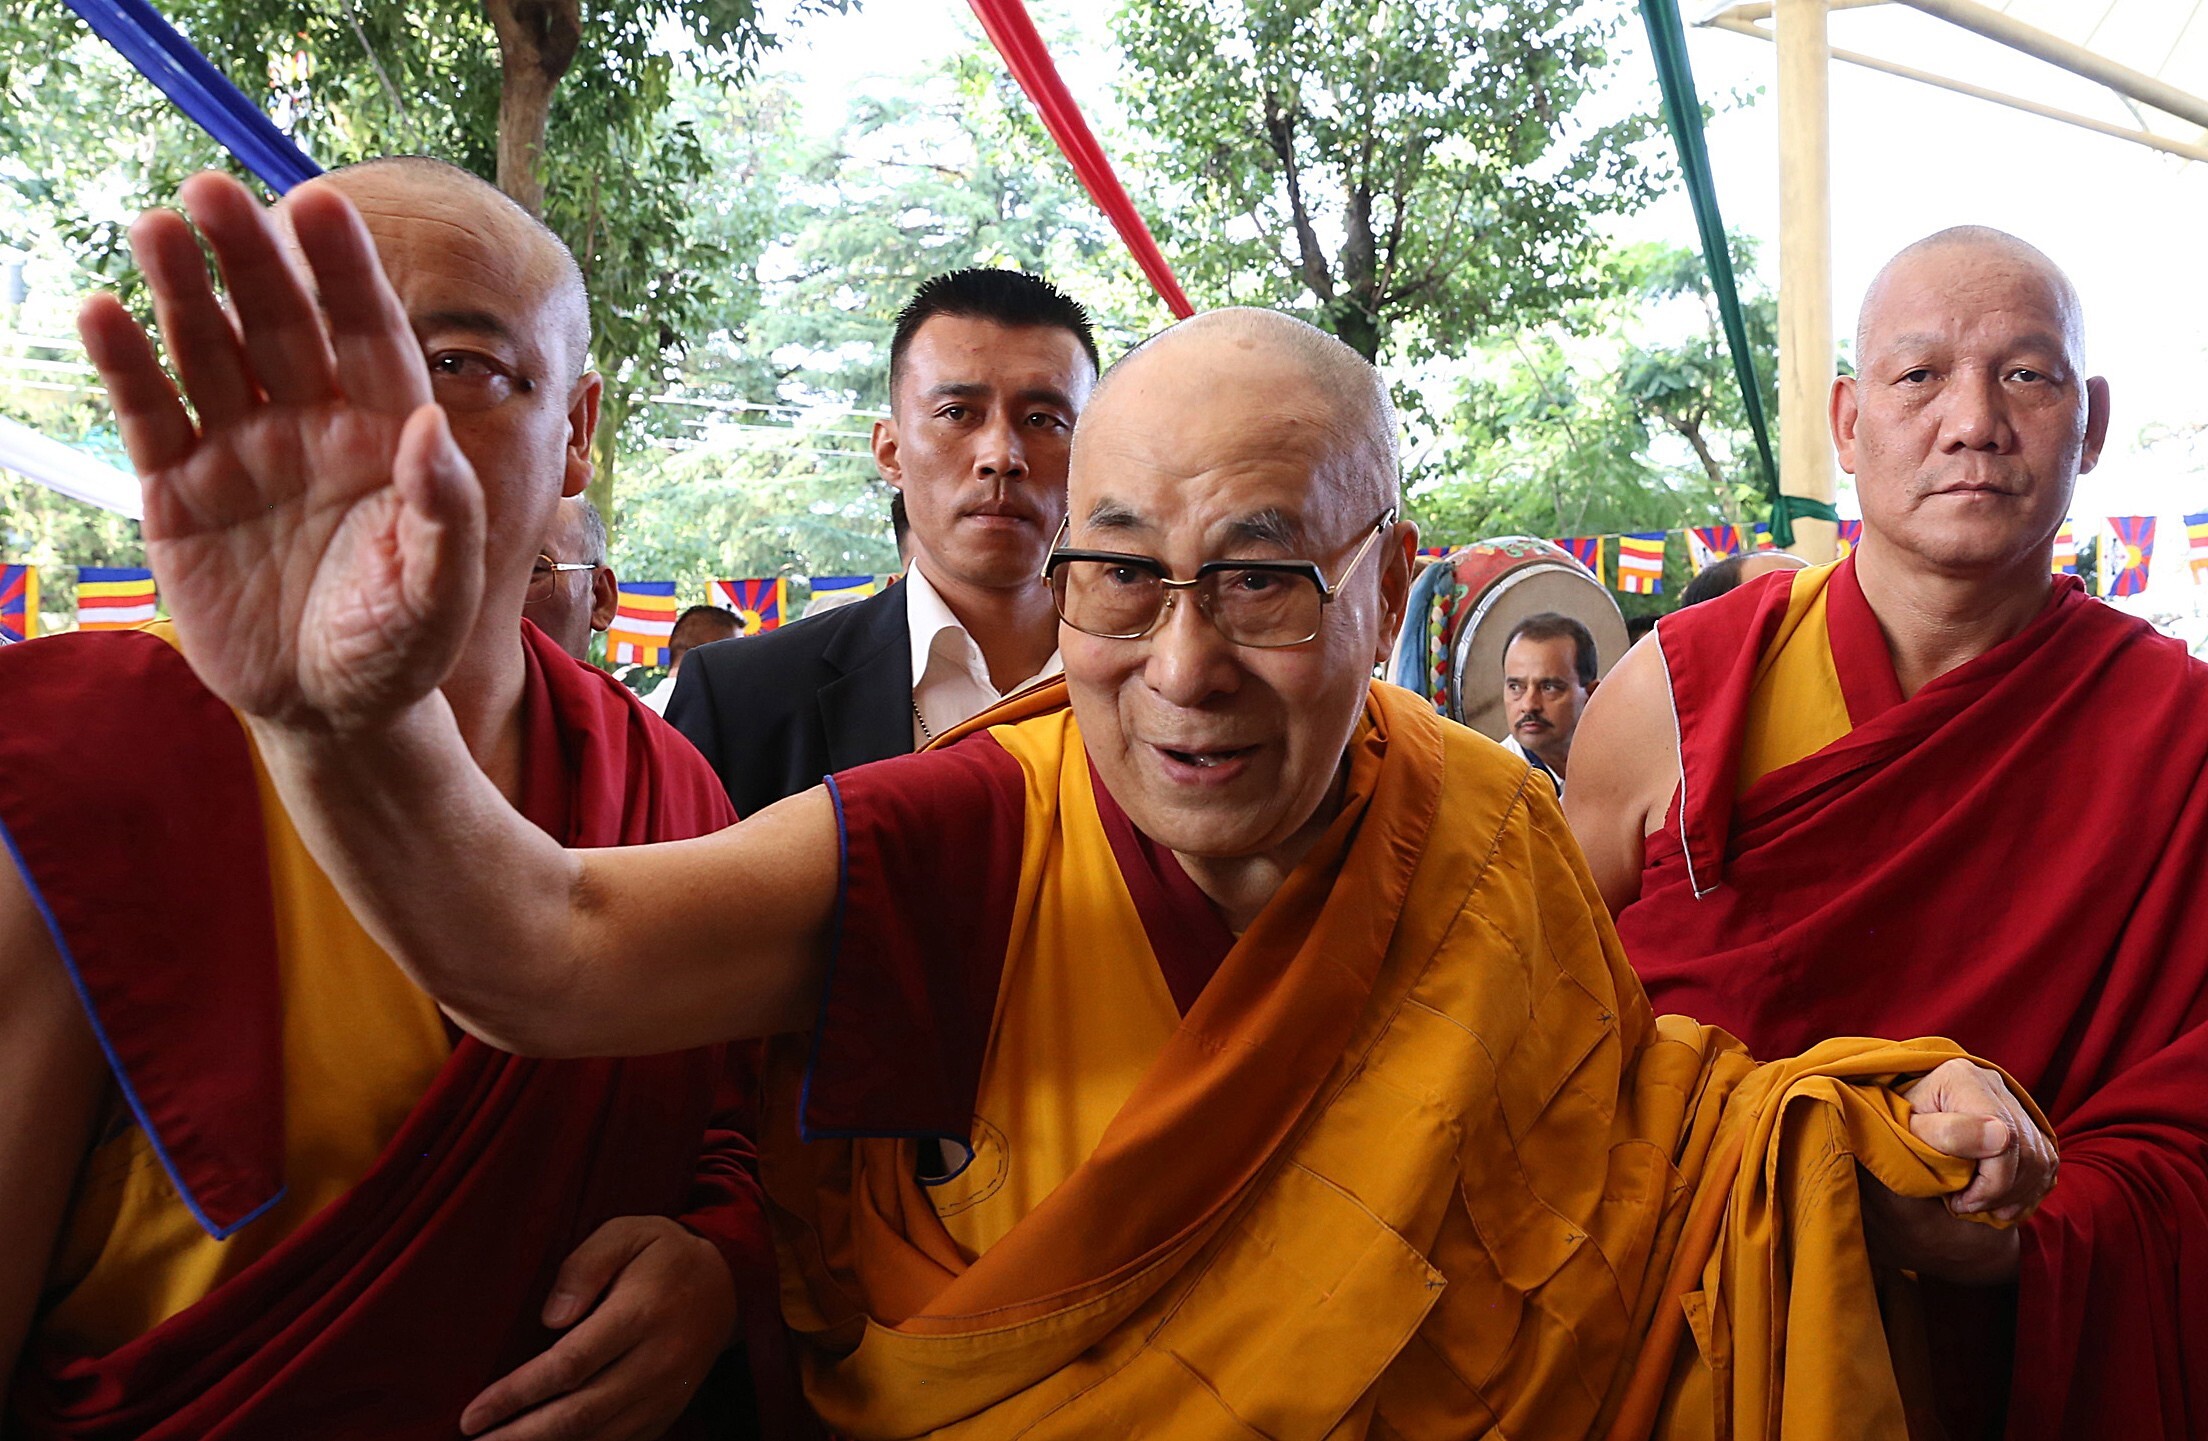 Beijing’s strategy on the Dalai Lama, Tibet’s spiritual leader who turned 85 in July, seems to be to wait him out. Photo: EPA-EFE